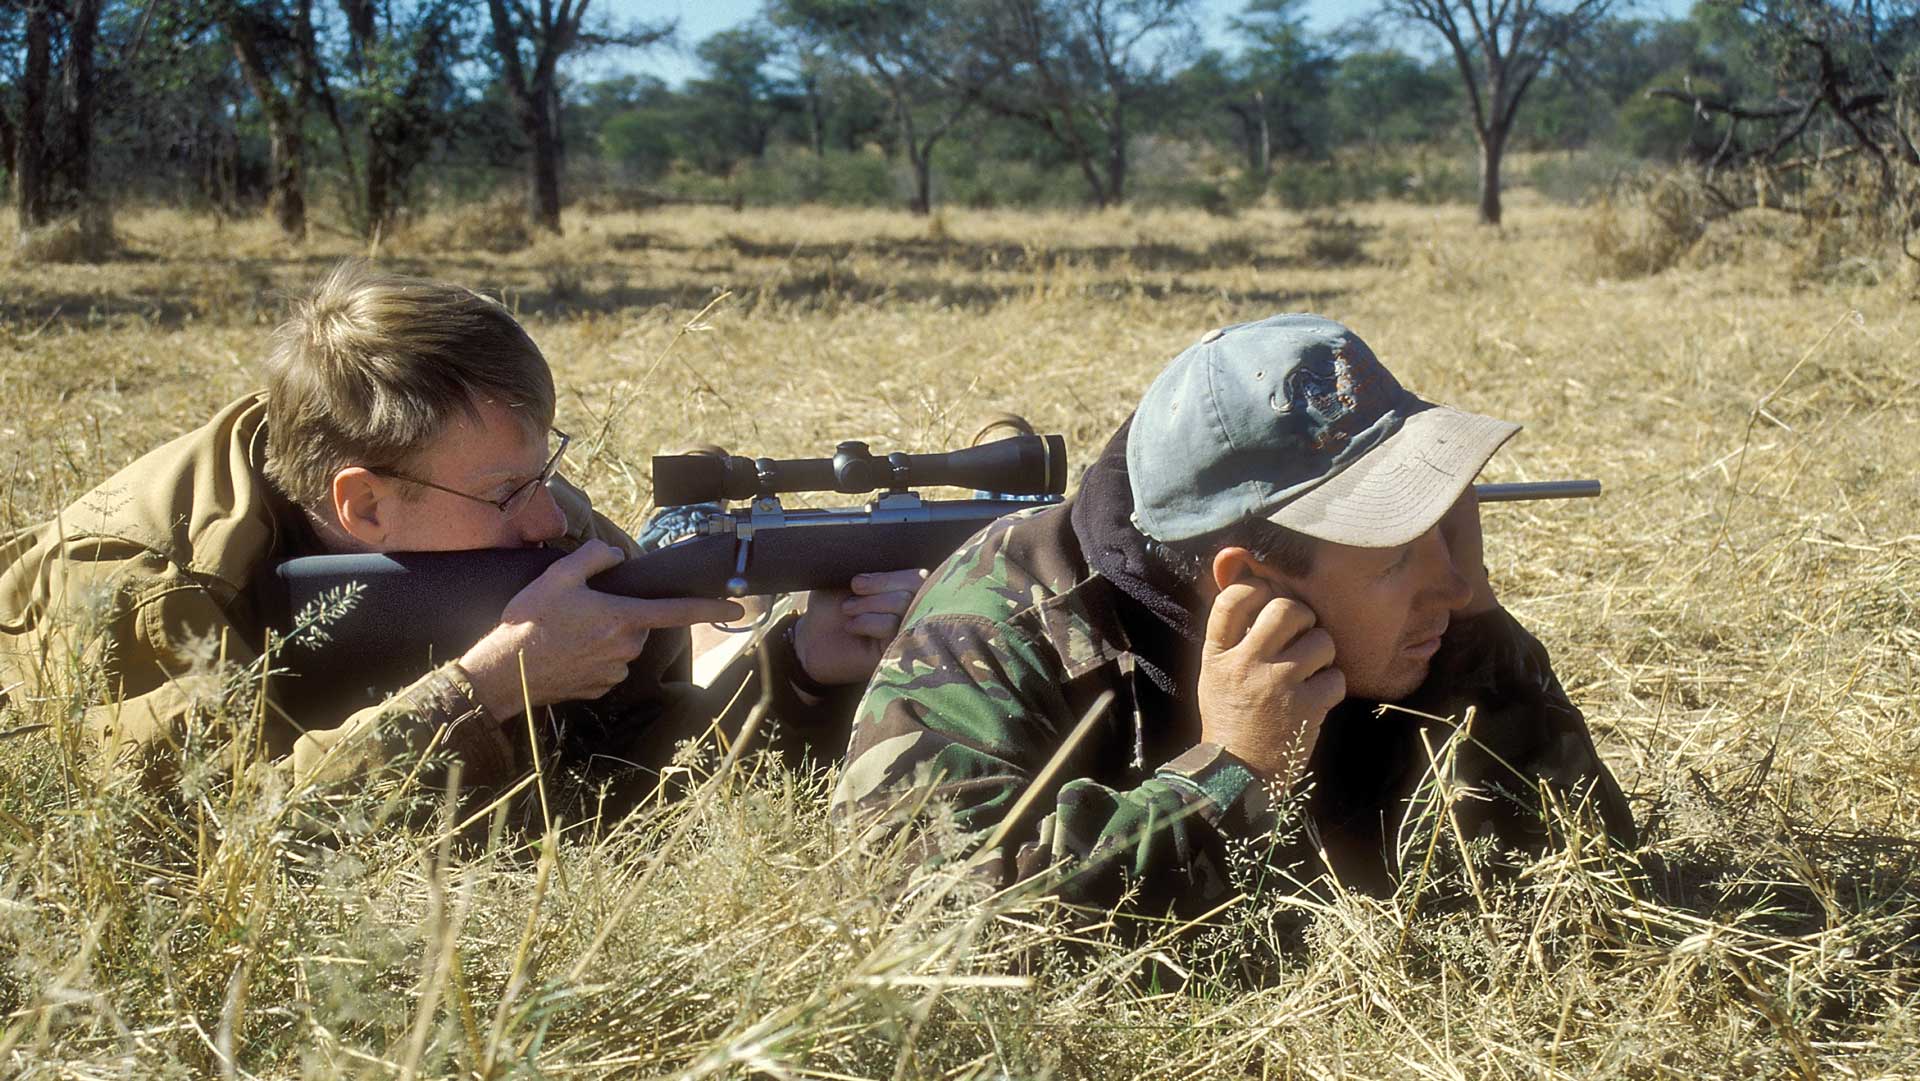 men hunters laying in grass rifle shooting outdoors field africa